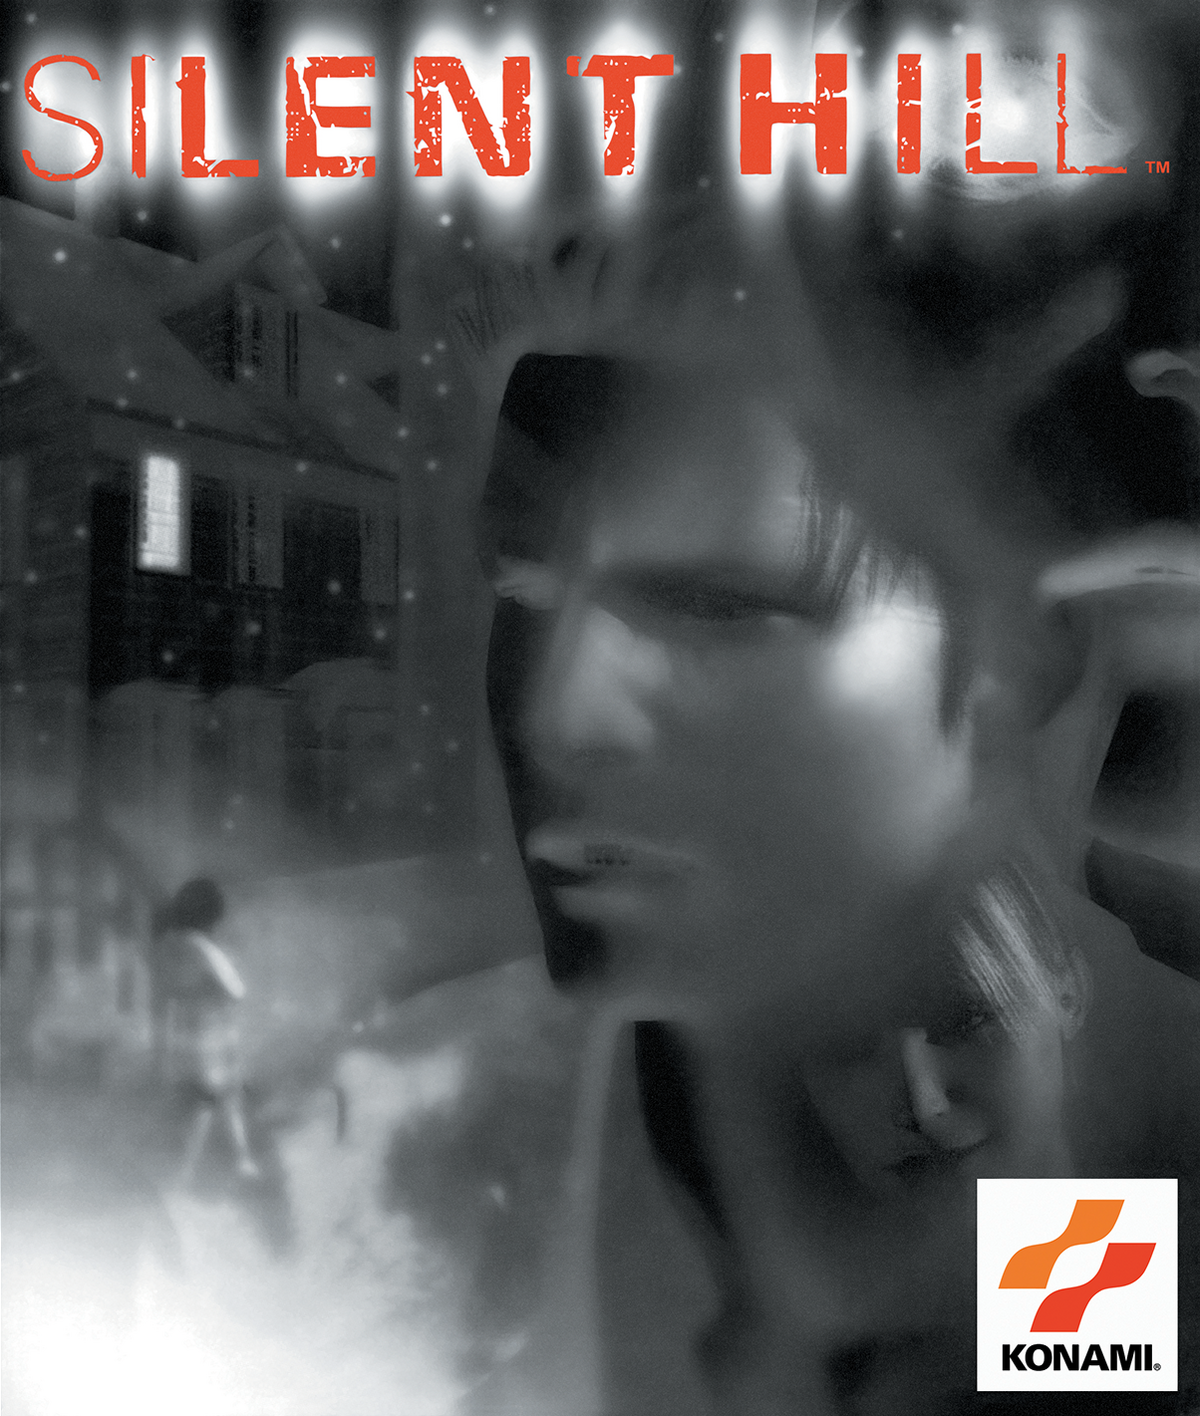 Silent Hill 2 may not have a Pyramid Head origin story, thankfully